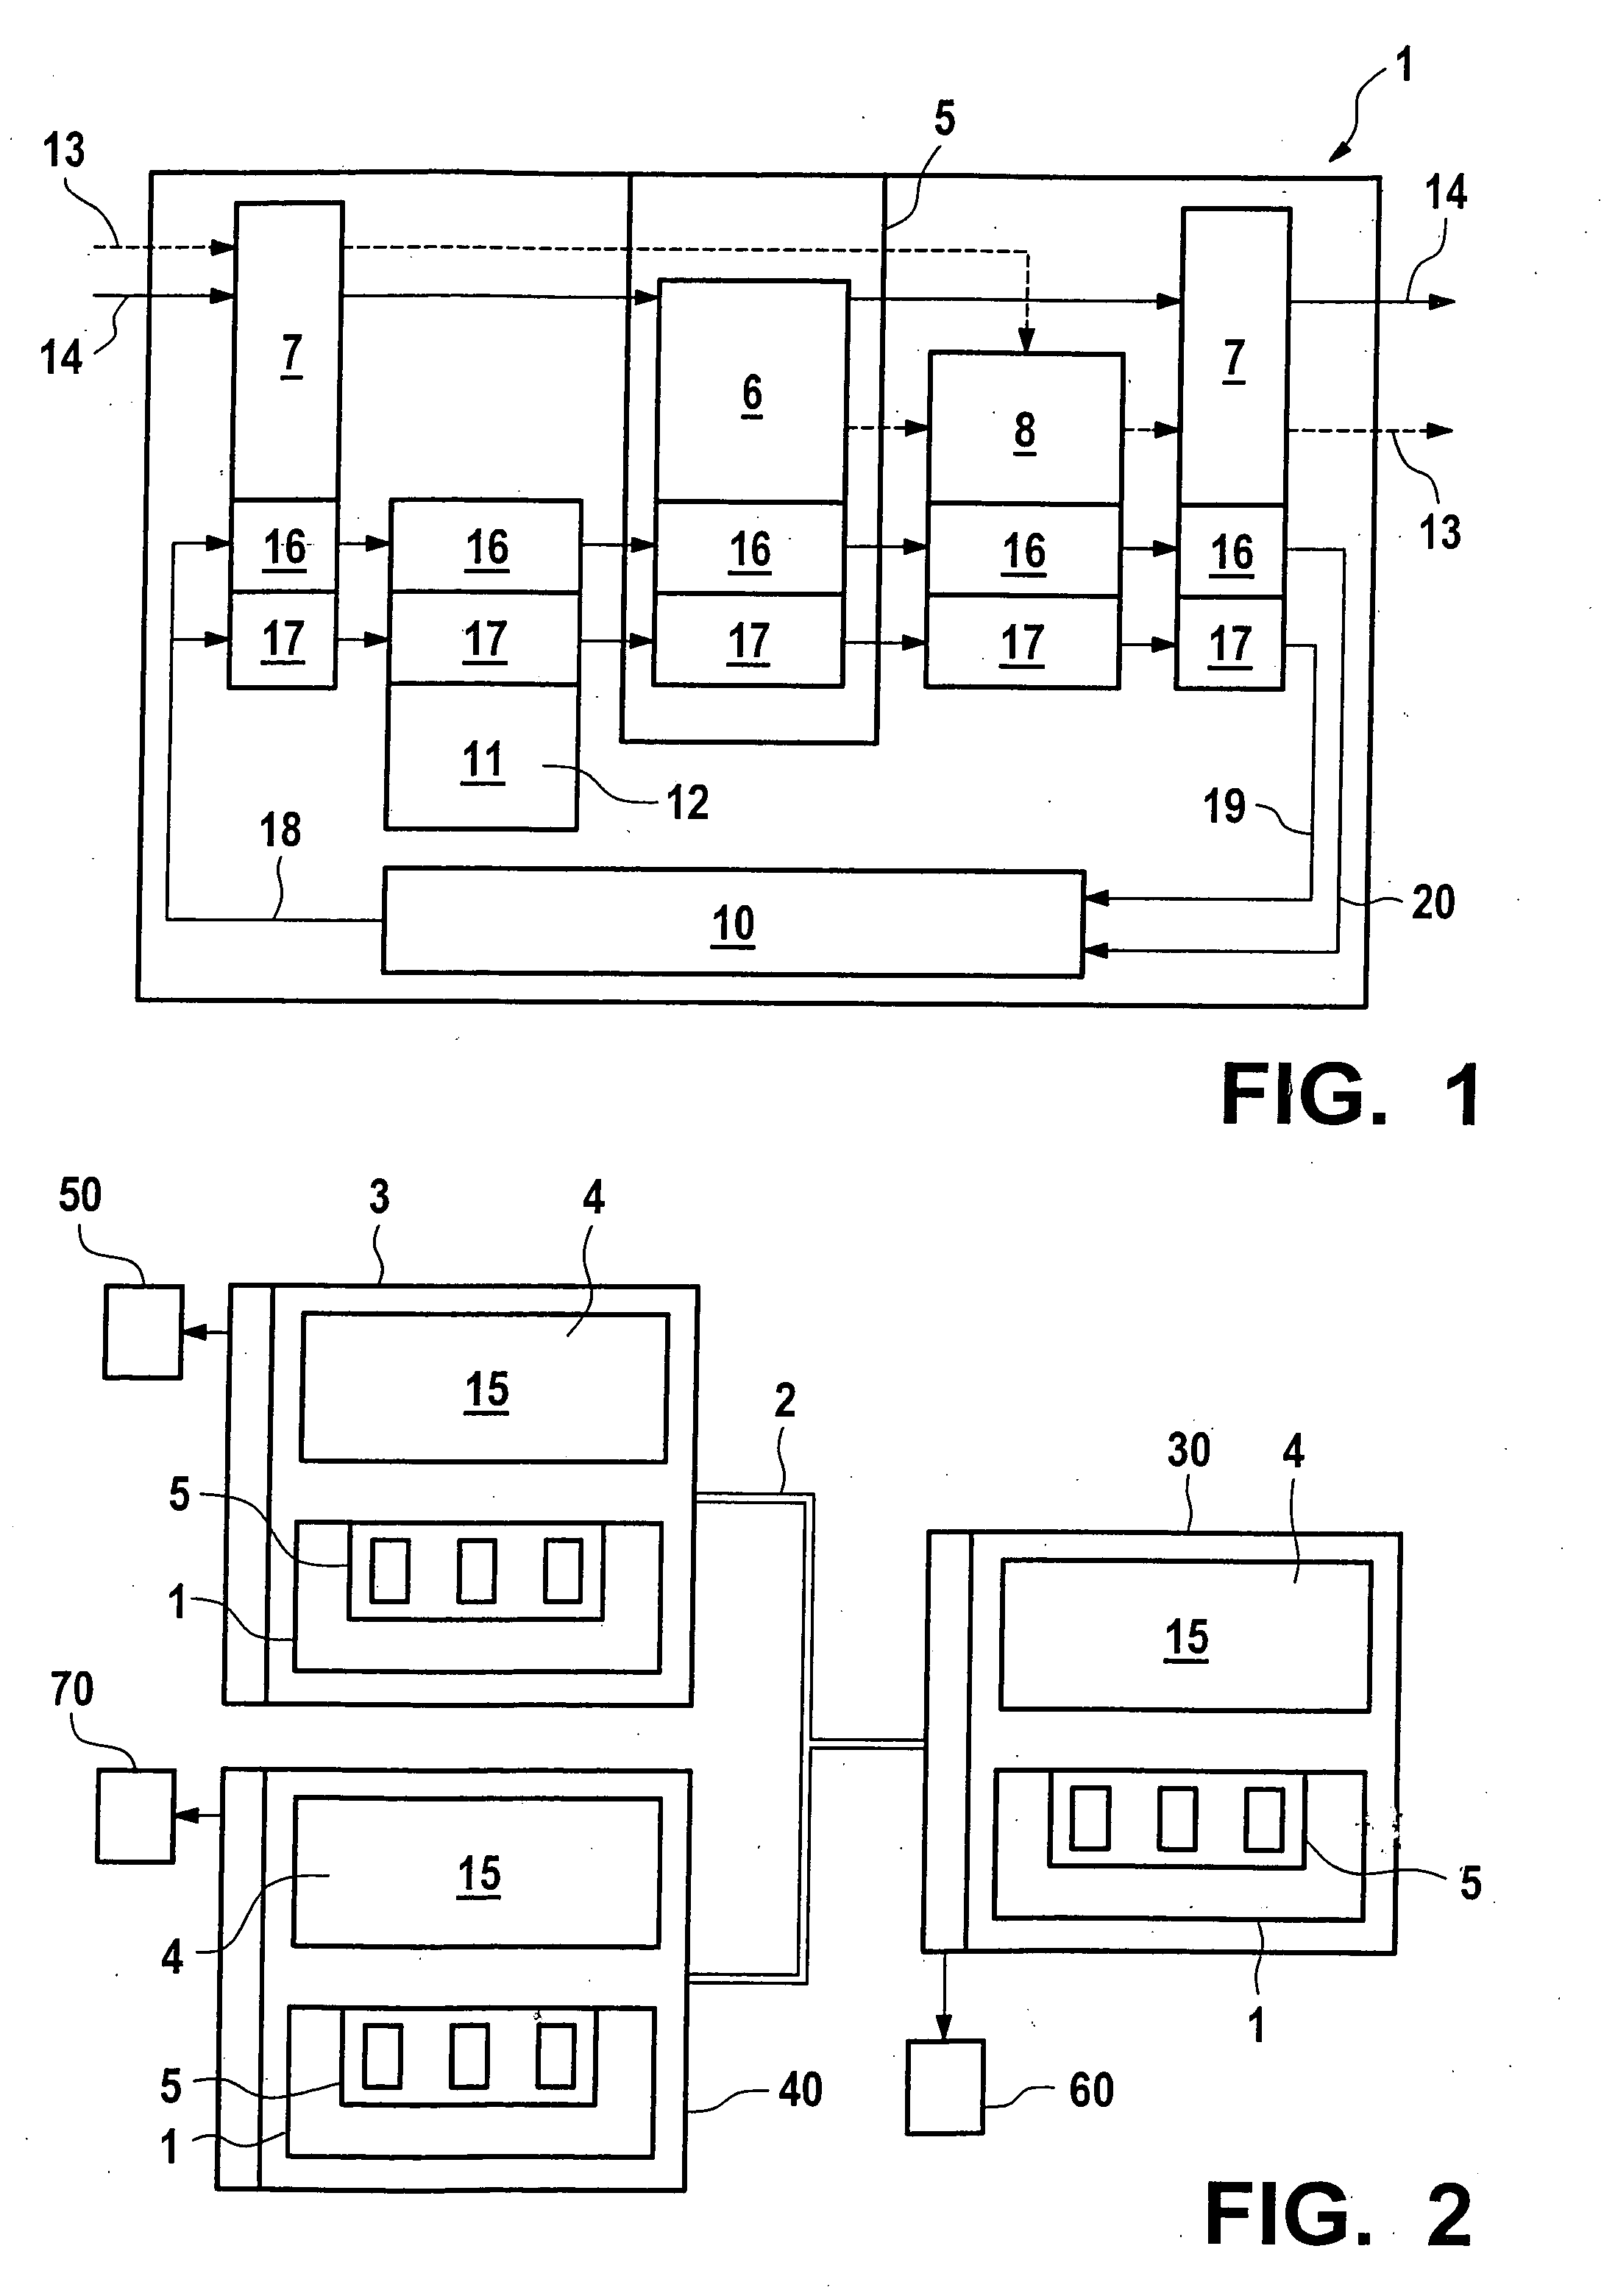 Method for monitoring a technical system